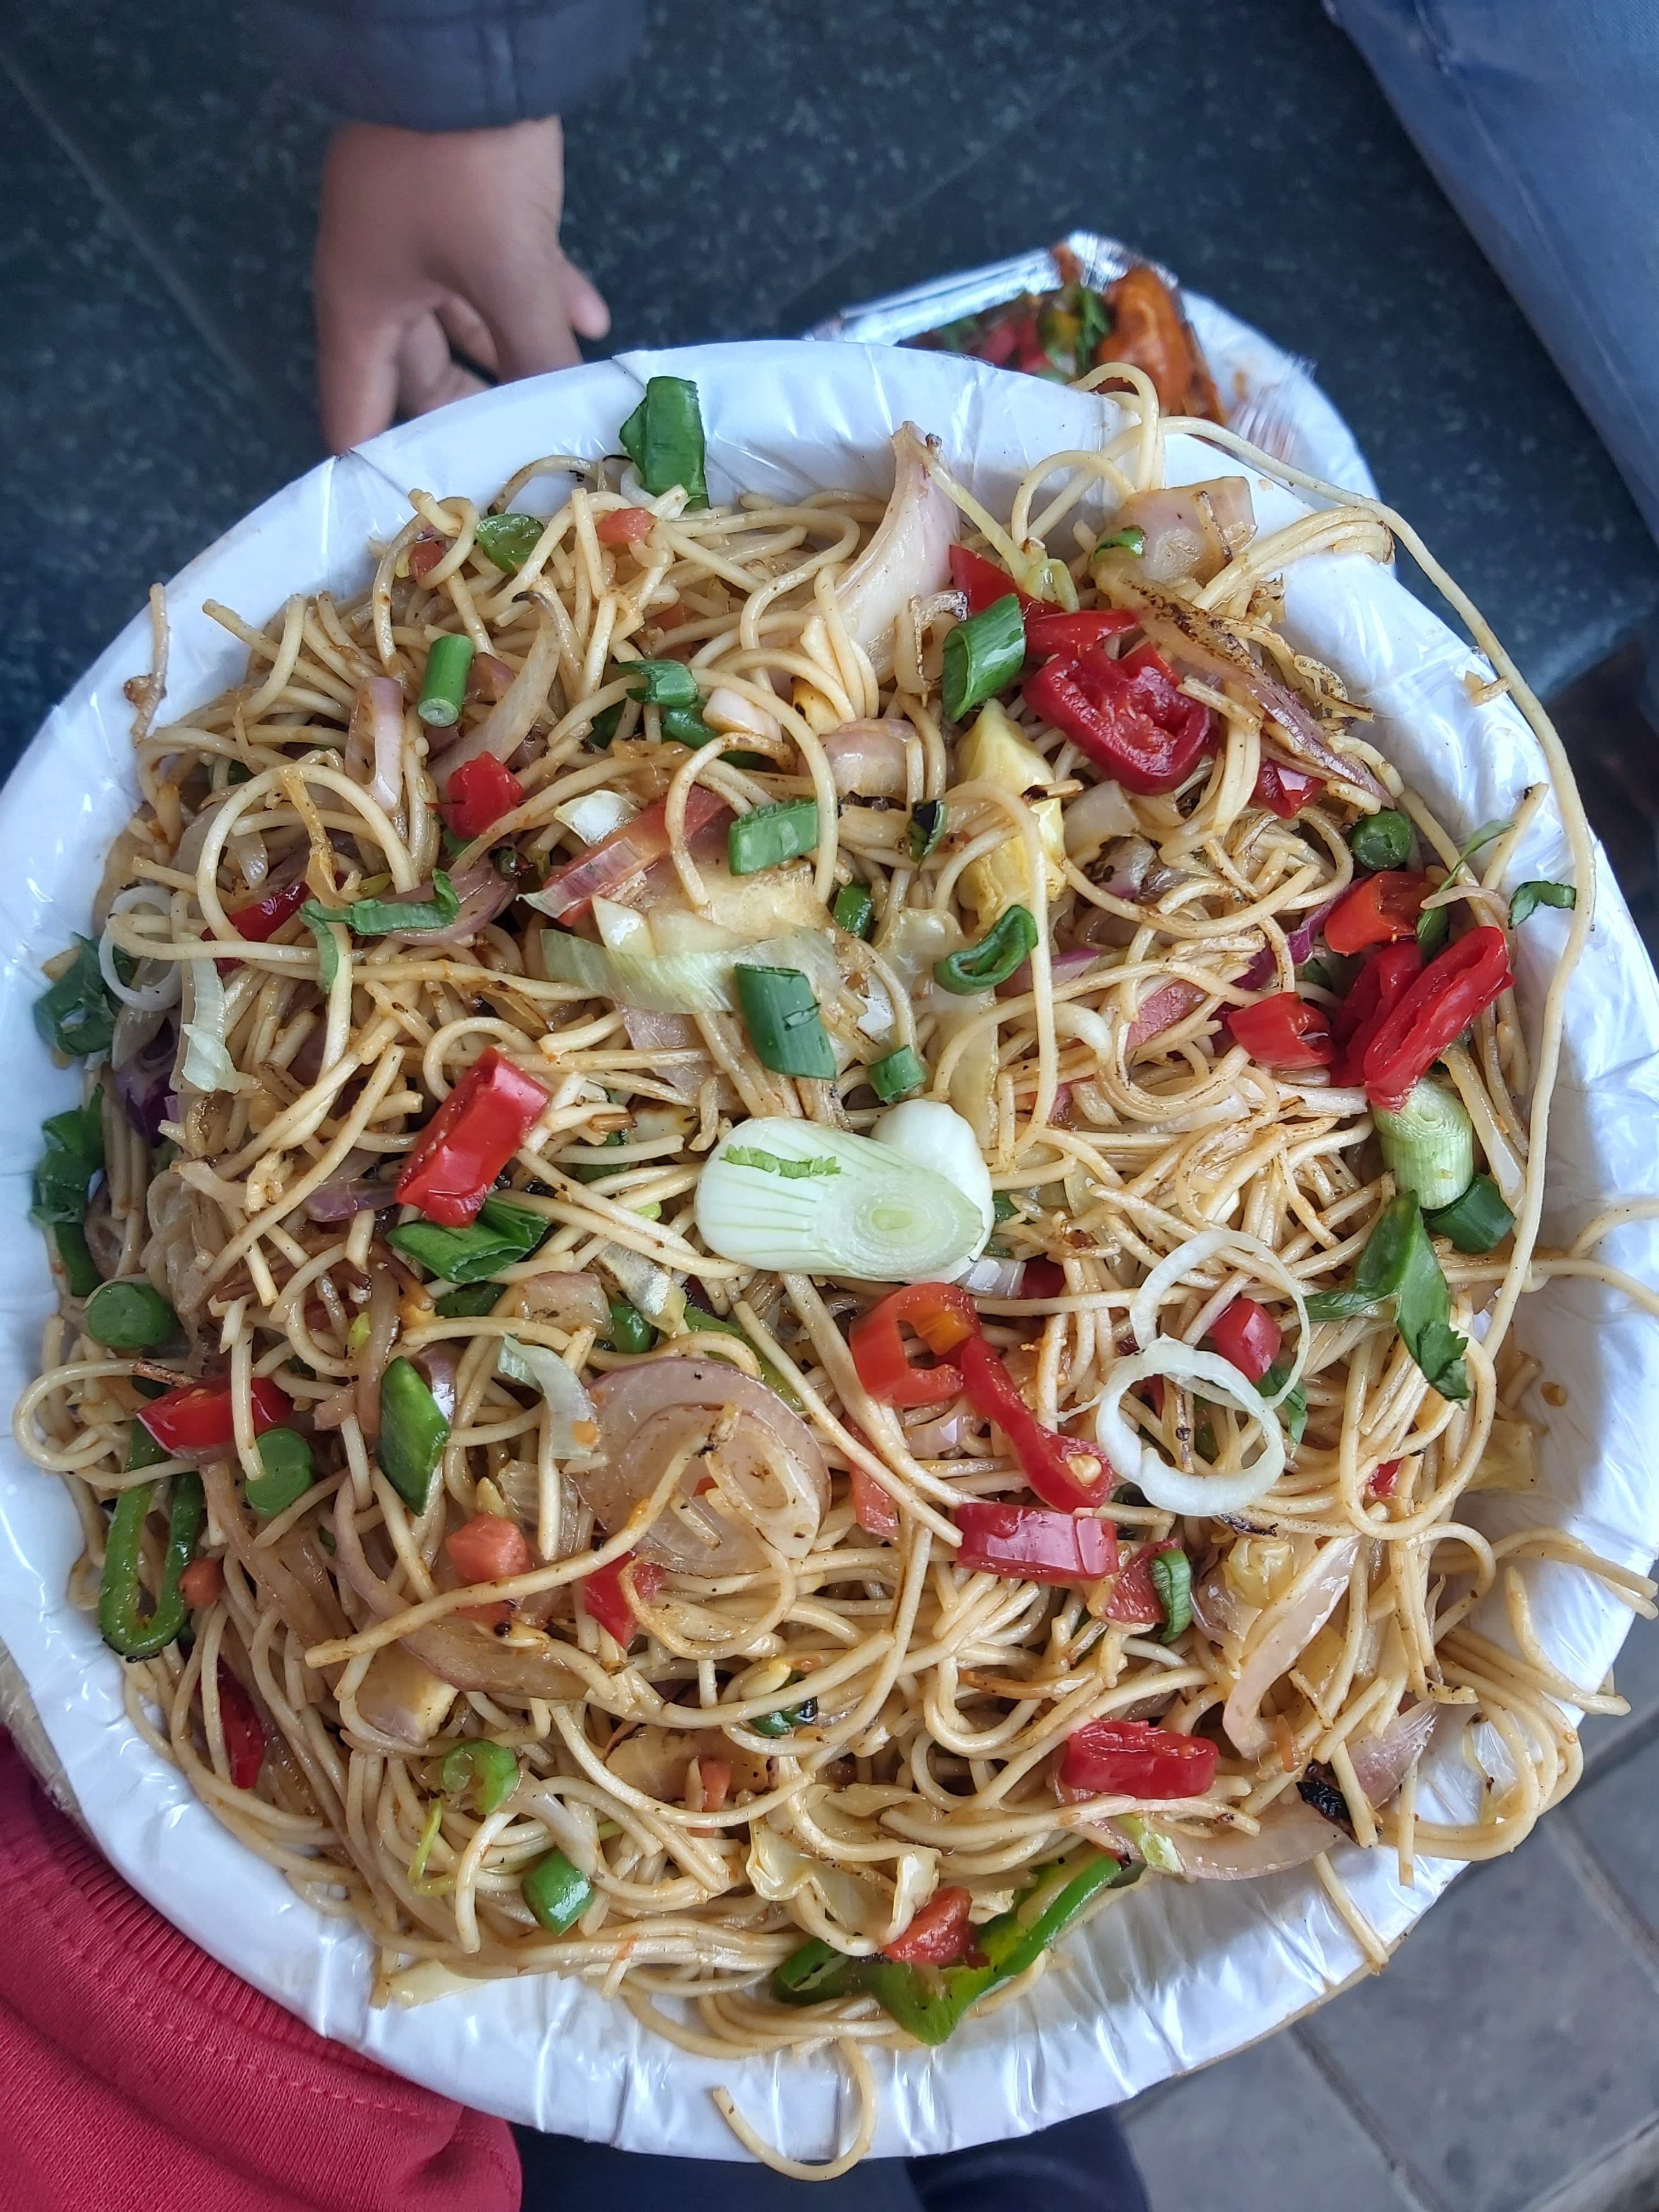 Dish,Cuisine,Food,Noodle,Chow mein,Fried noodles,Spaghetti,Capellini,Lo mein,Ingredient